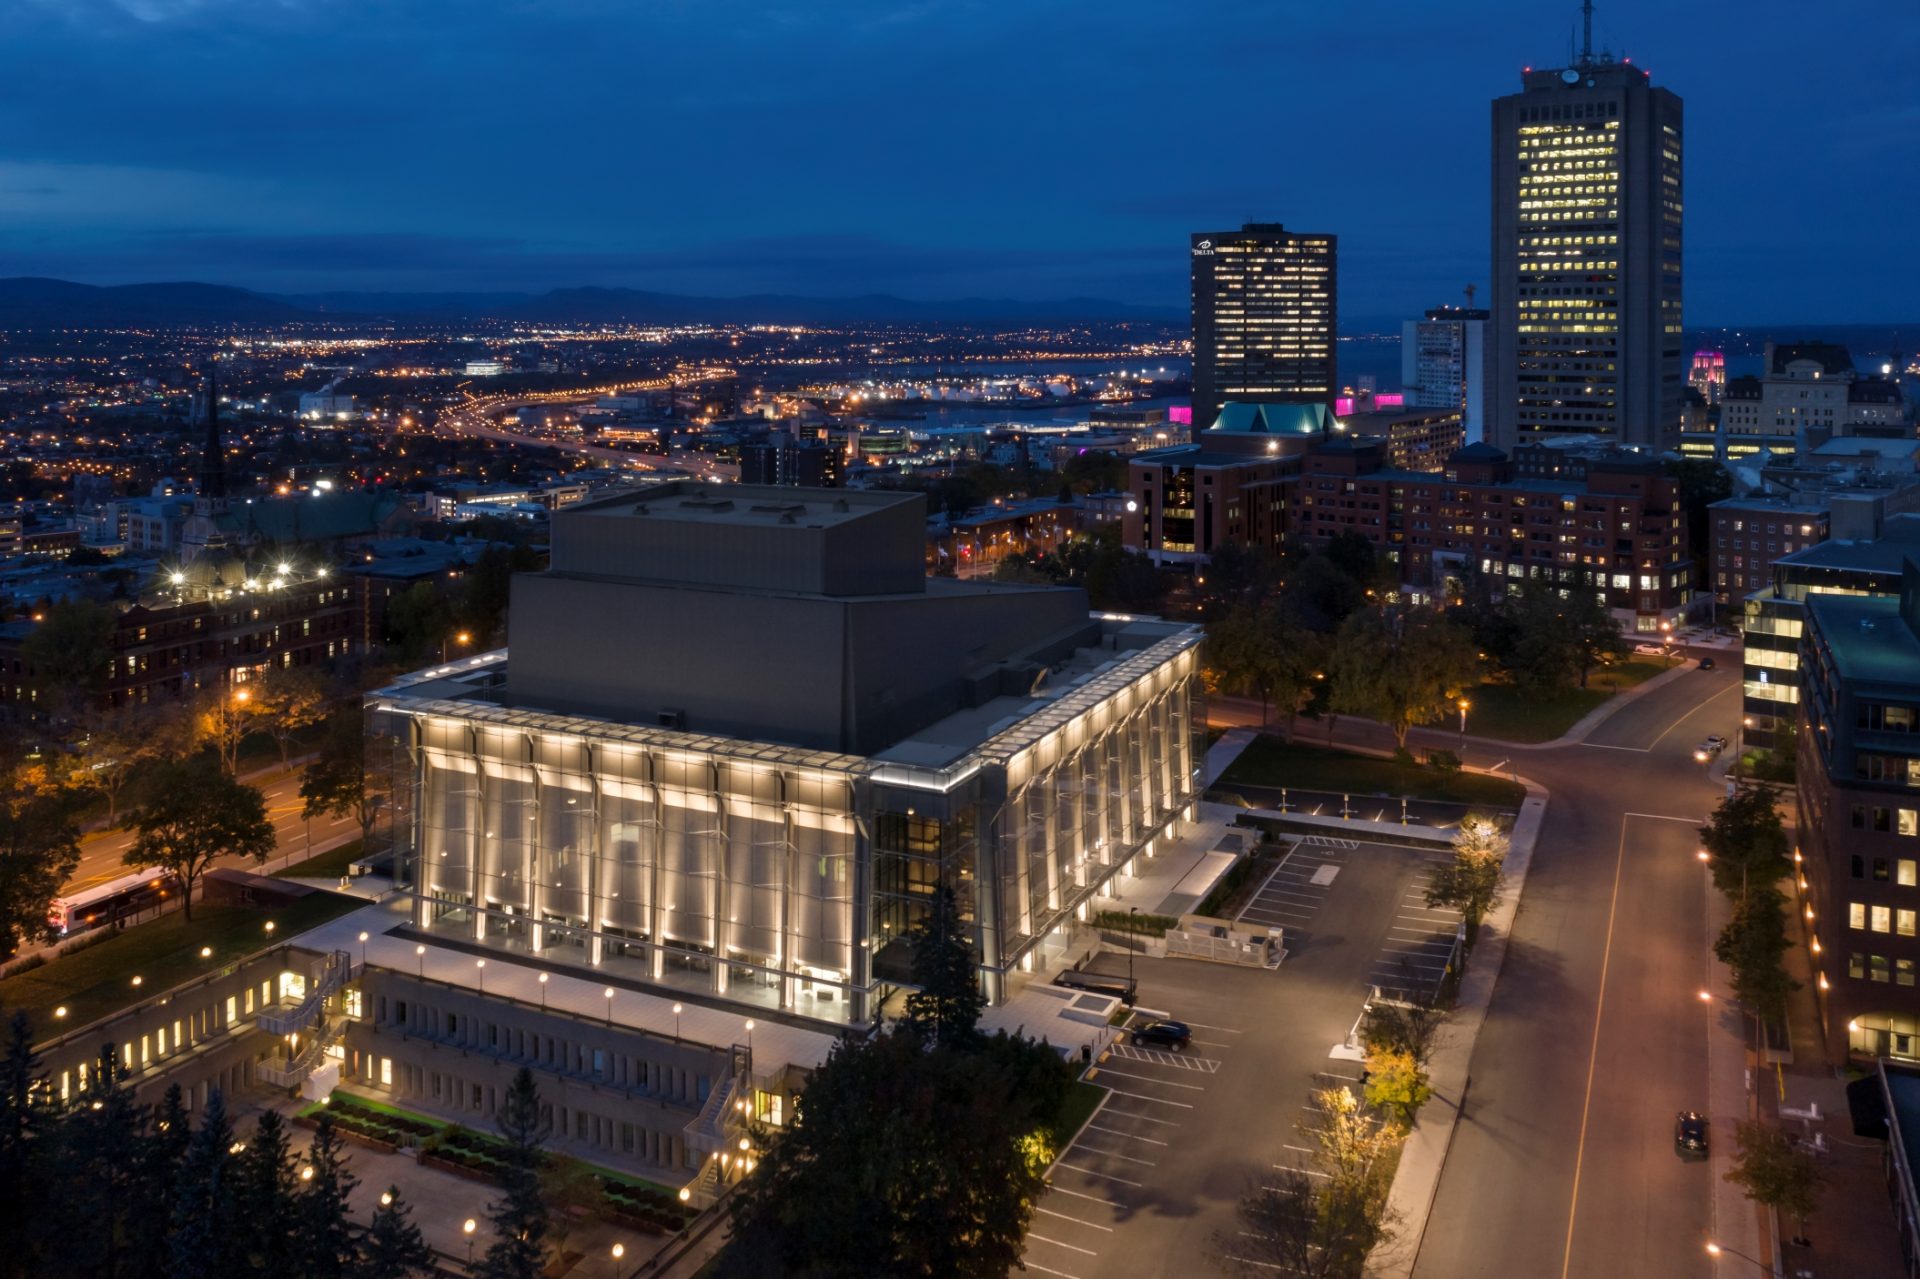 grand-theatre-quebec-lemay-atelier-21-architecture-conservation-credit-stephanegroleau-glass-facade-casing-night-view-drone-10